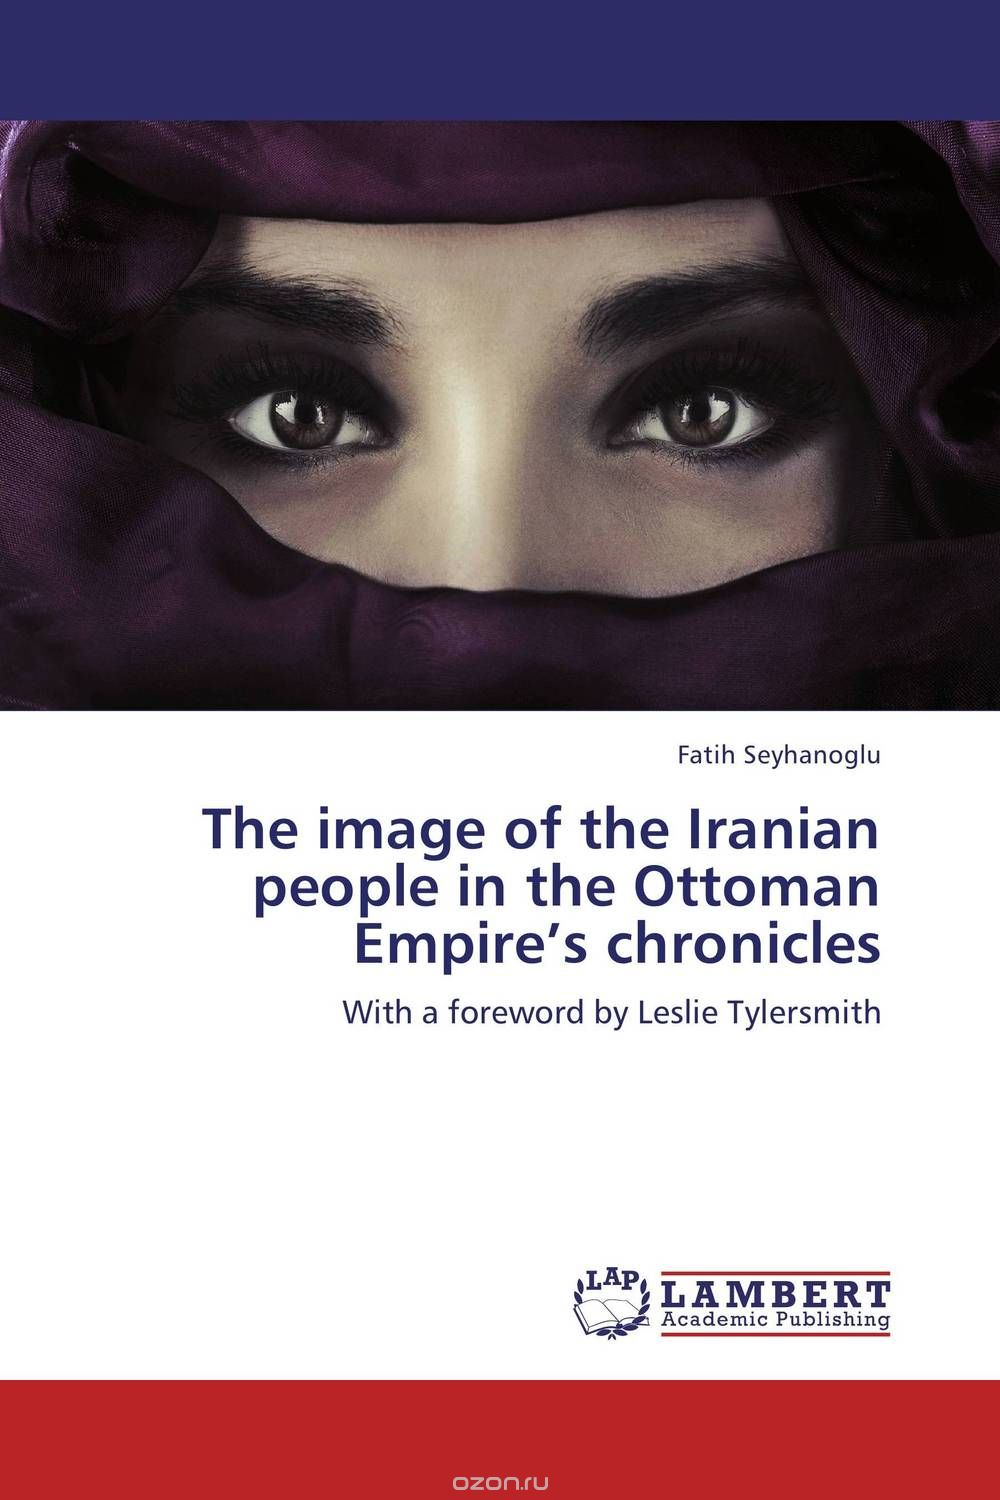 The image of the Iranian people in the Ottoman Empire’s chronicles